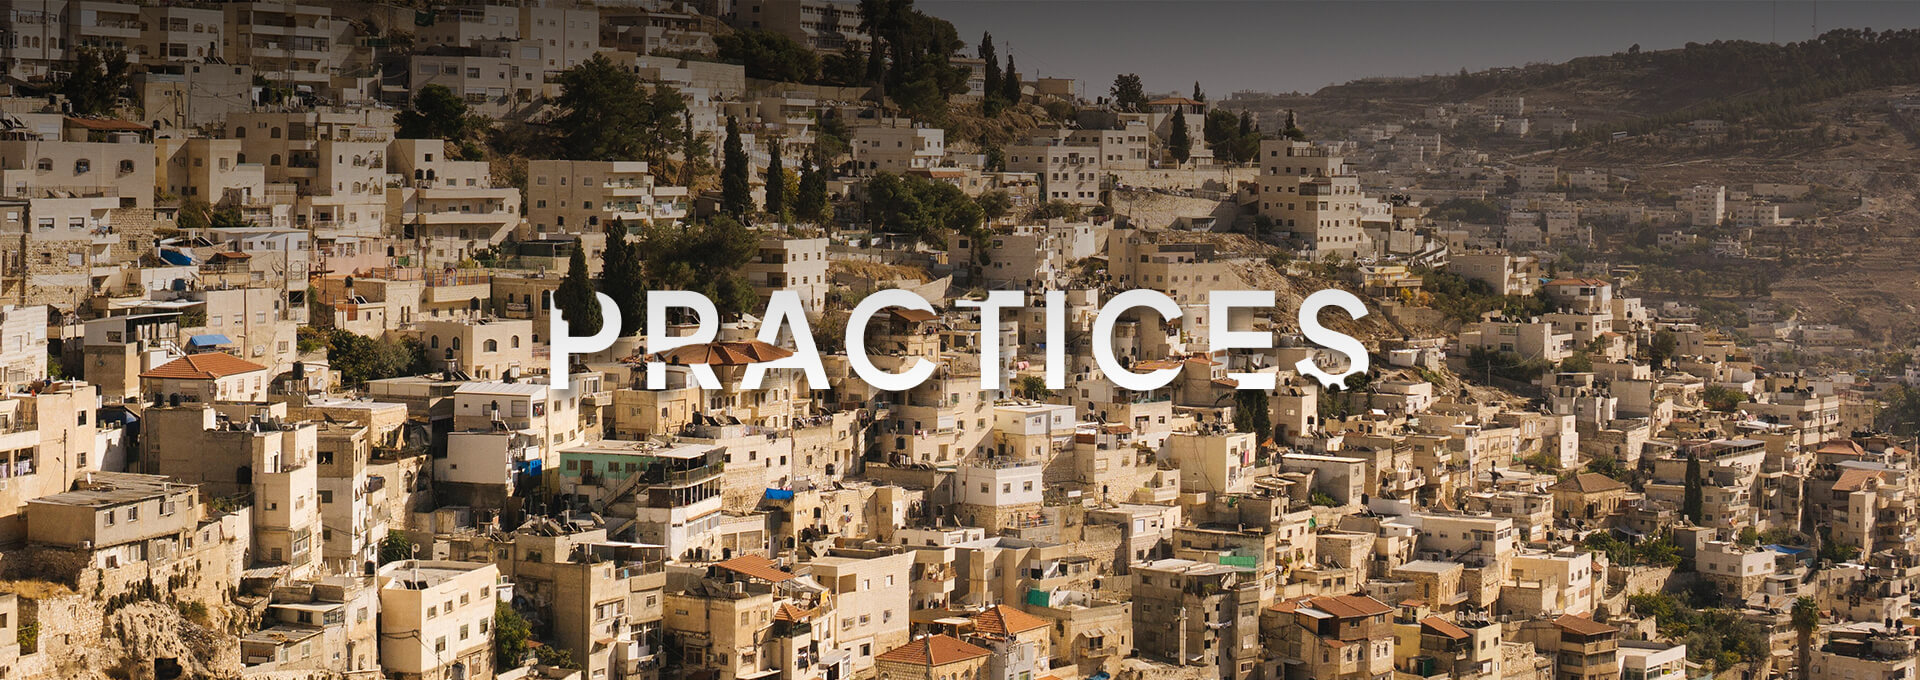 Probate challenges to Consider When Buying or Selling Residential Real Estate In Israel